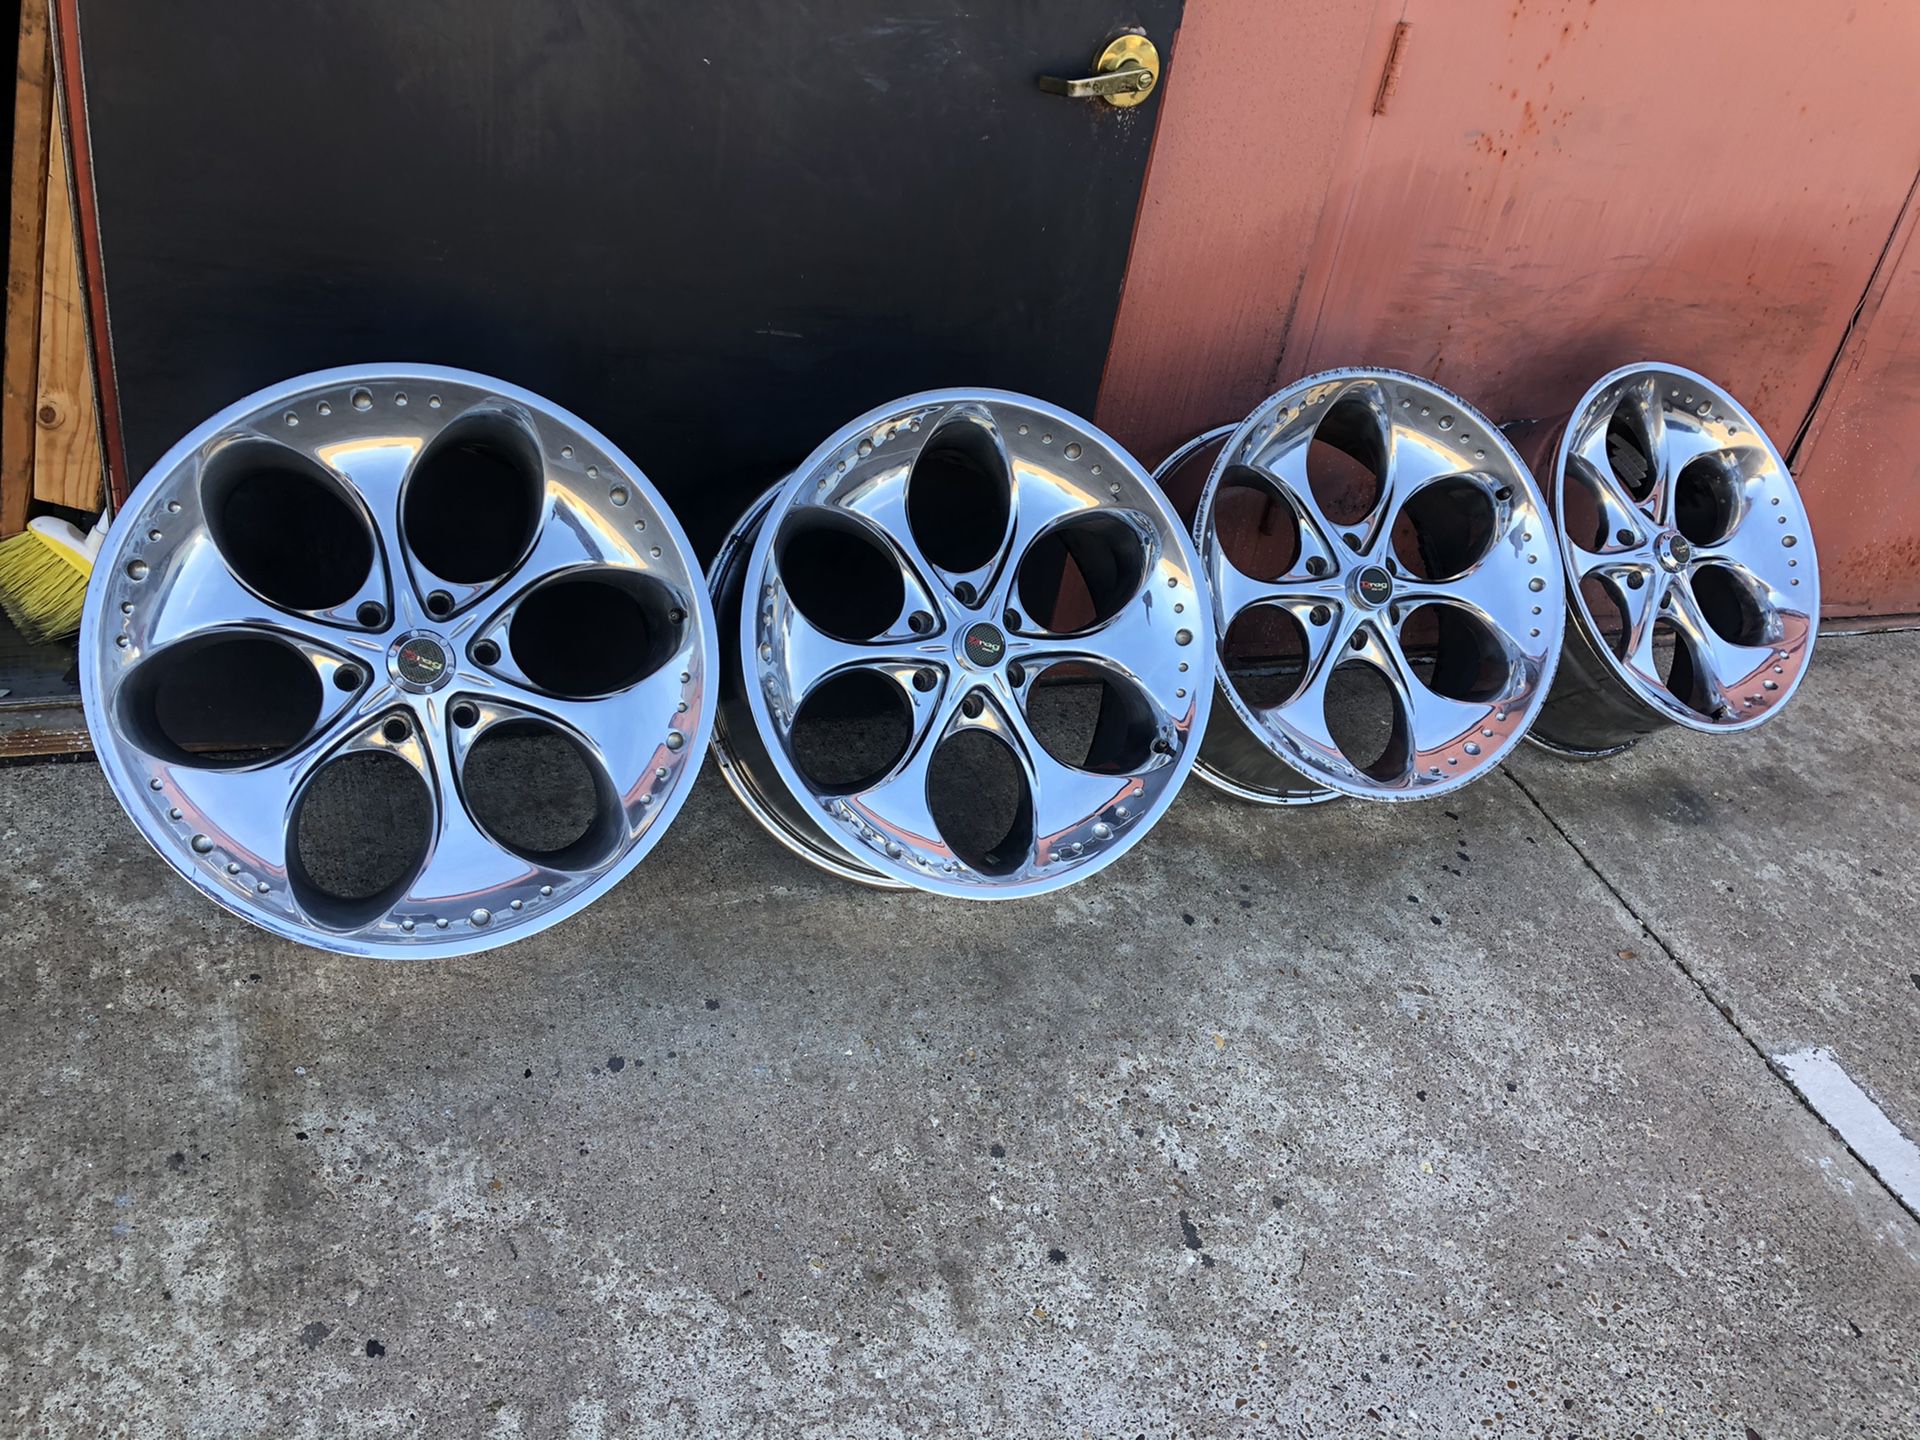 Used rims wheels 22 inch chrome after market for truck suv 6 lug bolt pattern 5.50 inch set of 4